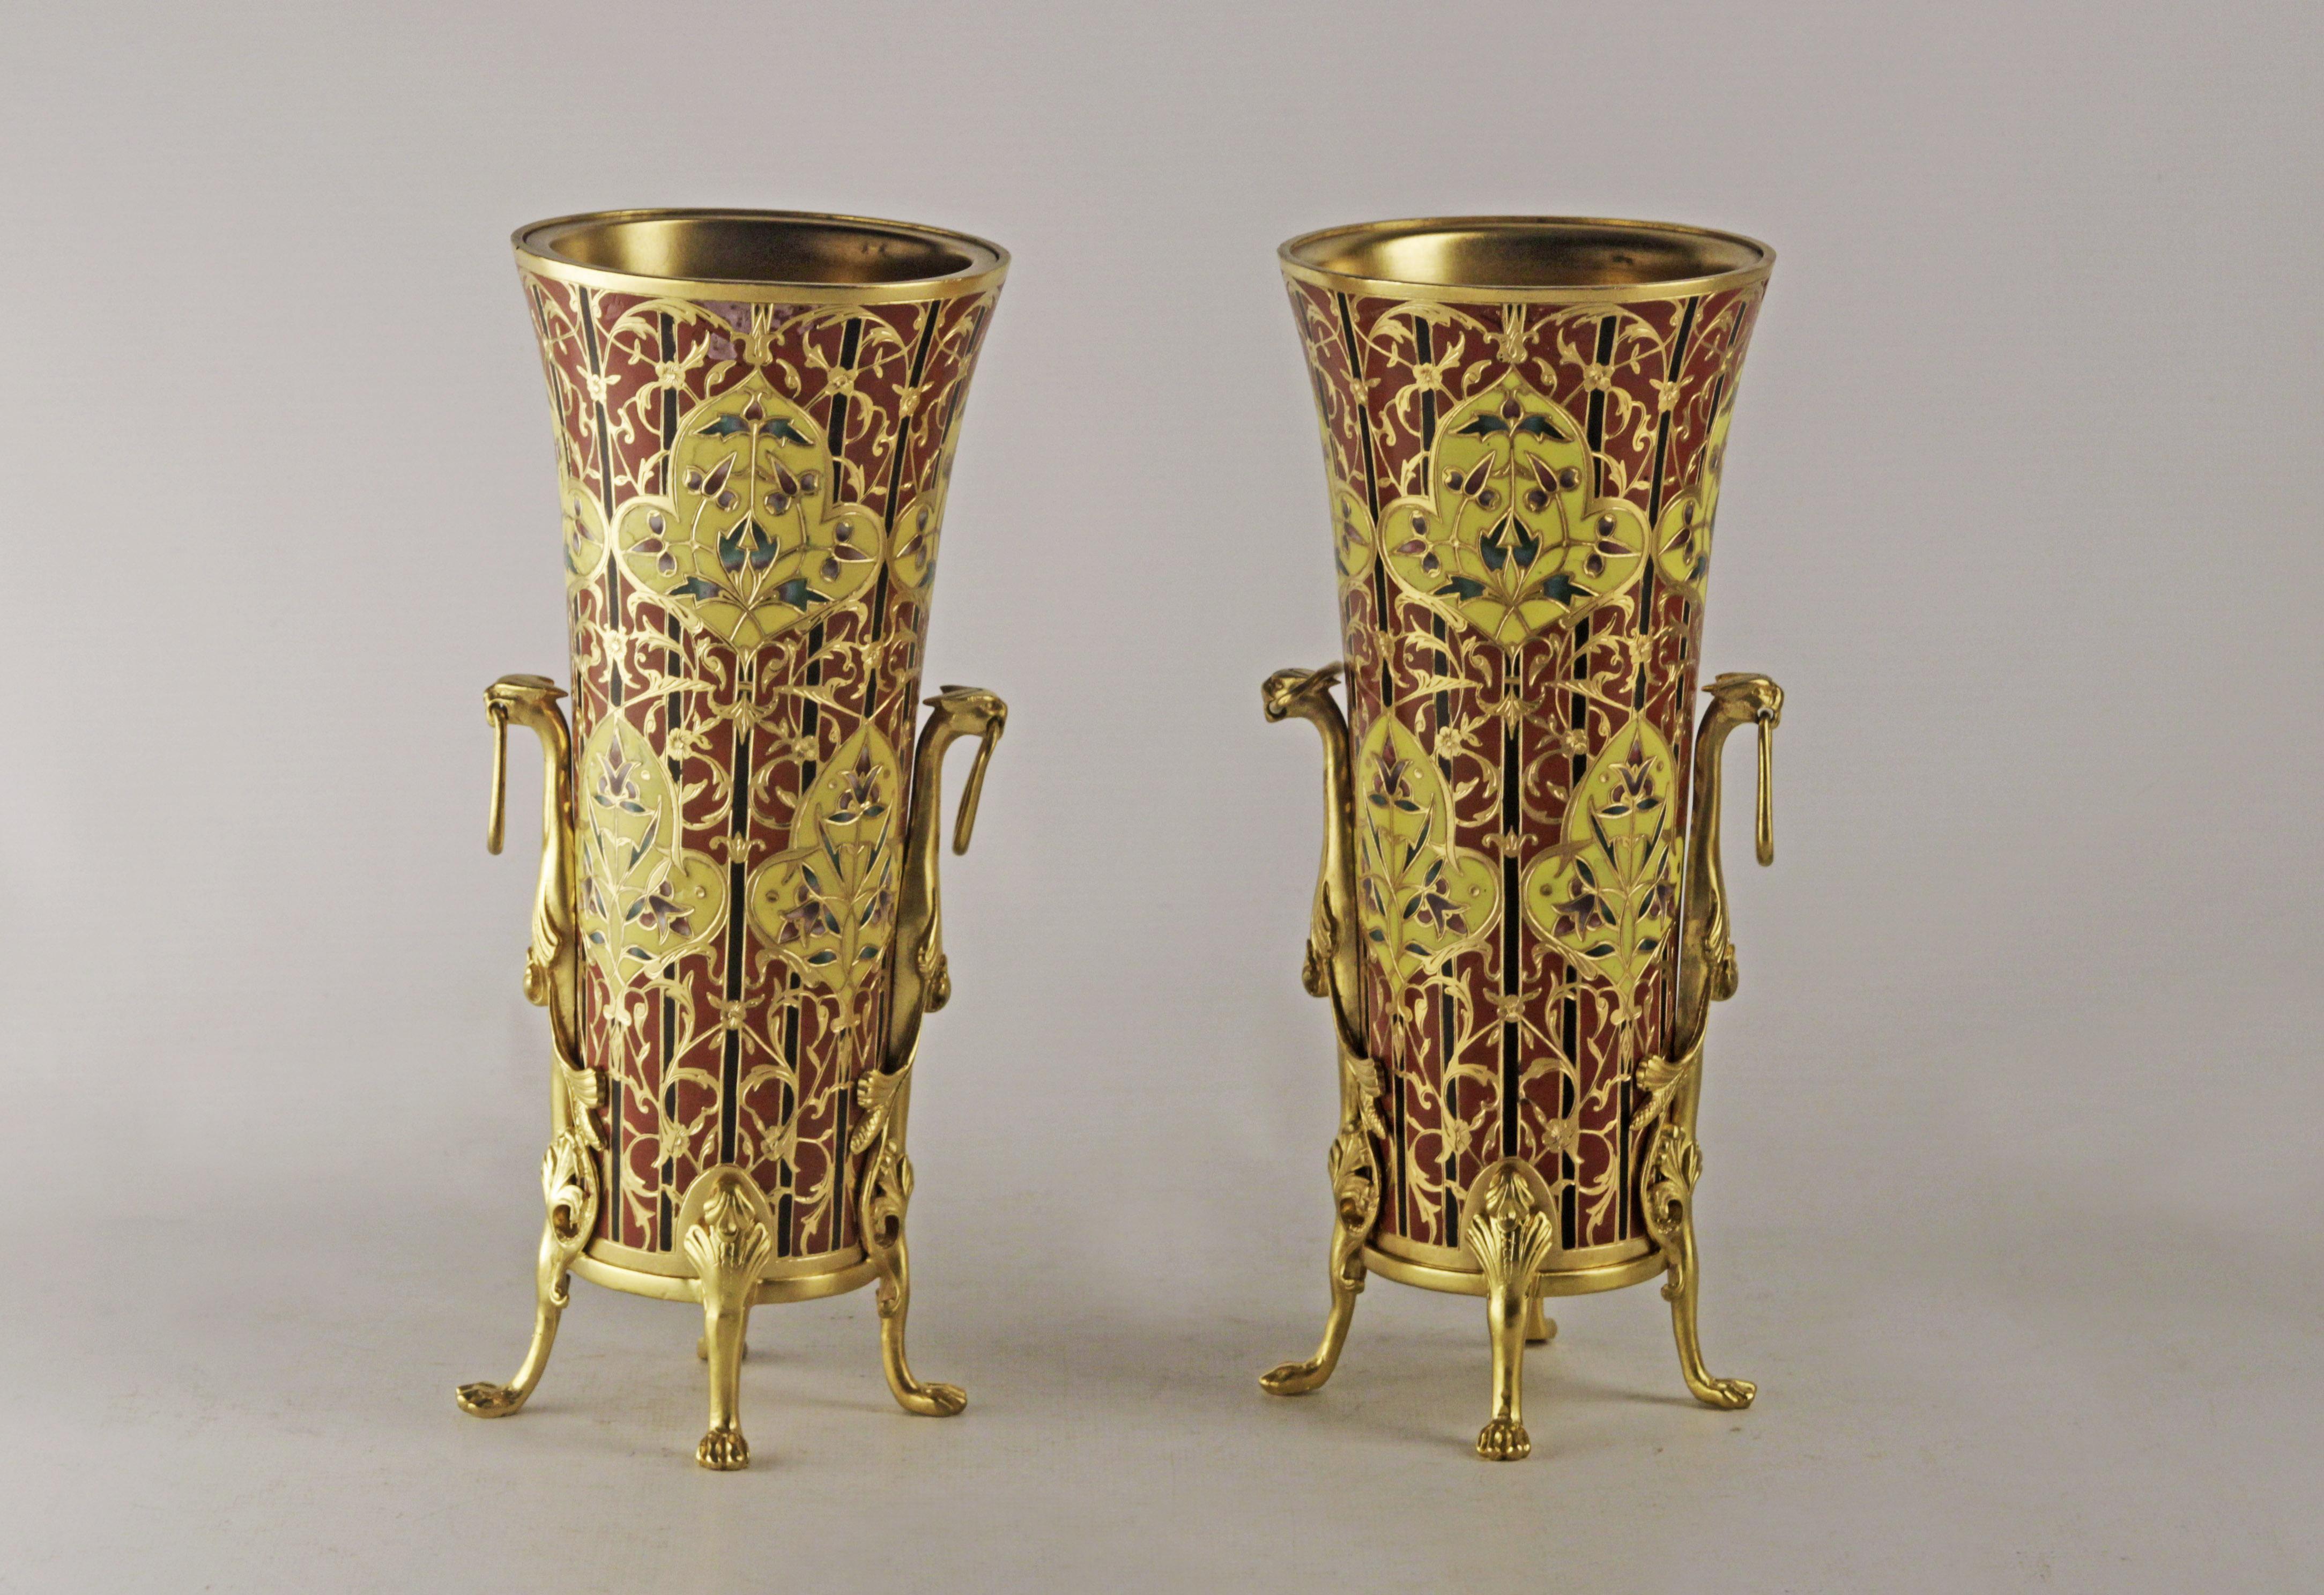 Pair of Barbadians of Napoleon III
Pair of vases with enamel Barbediene French foundry
Very good condition (some natural wear)
Gilt bronze and enamel
Attributed to Louis Constant Sevin
Signed on its base lower part Barbediene
Decorated with